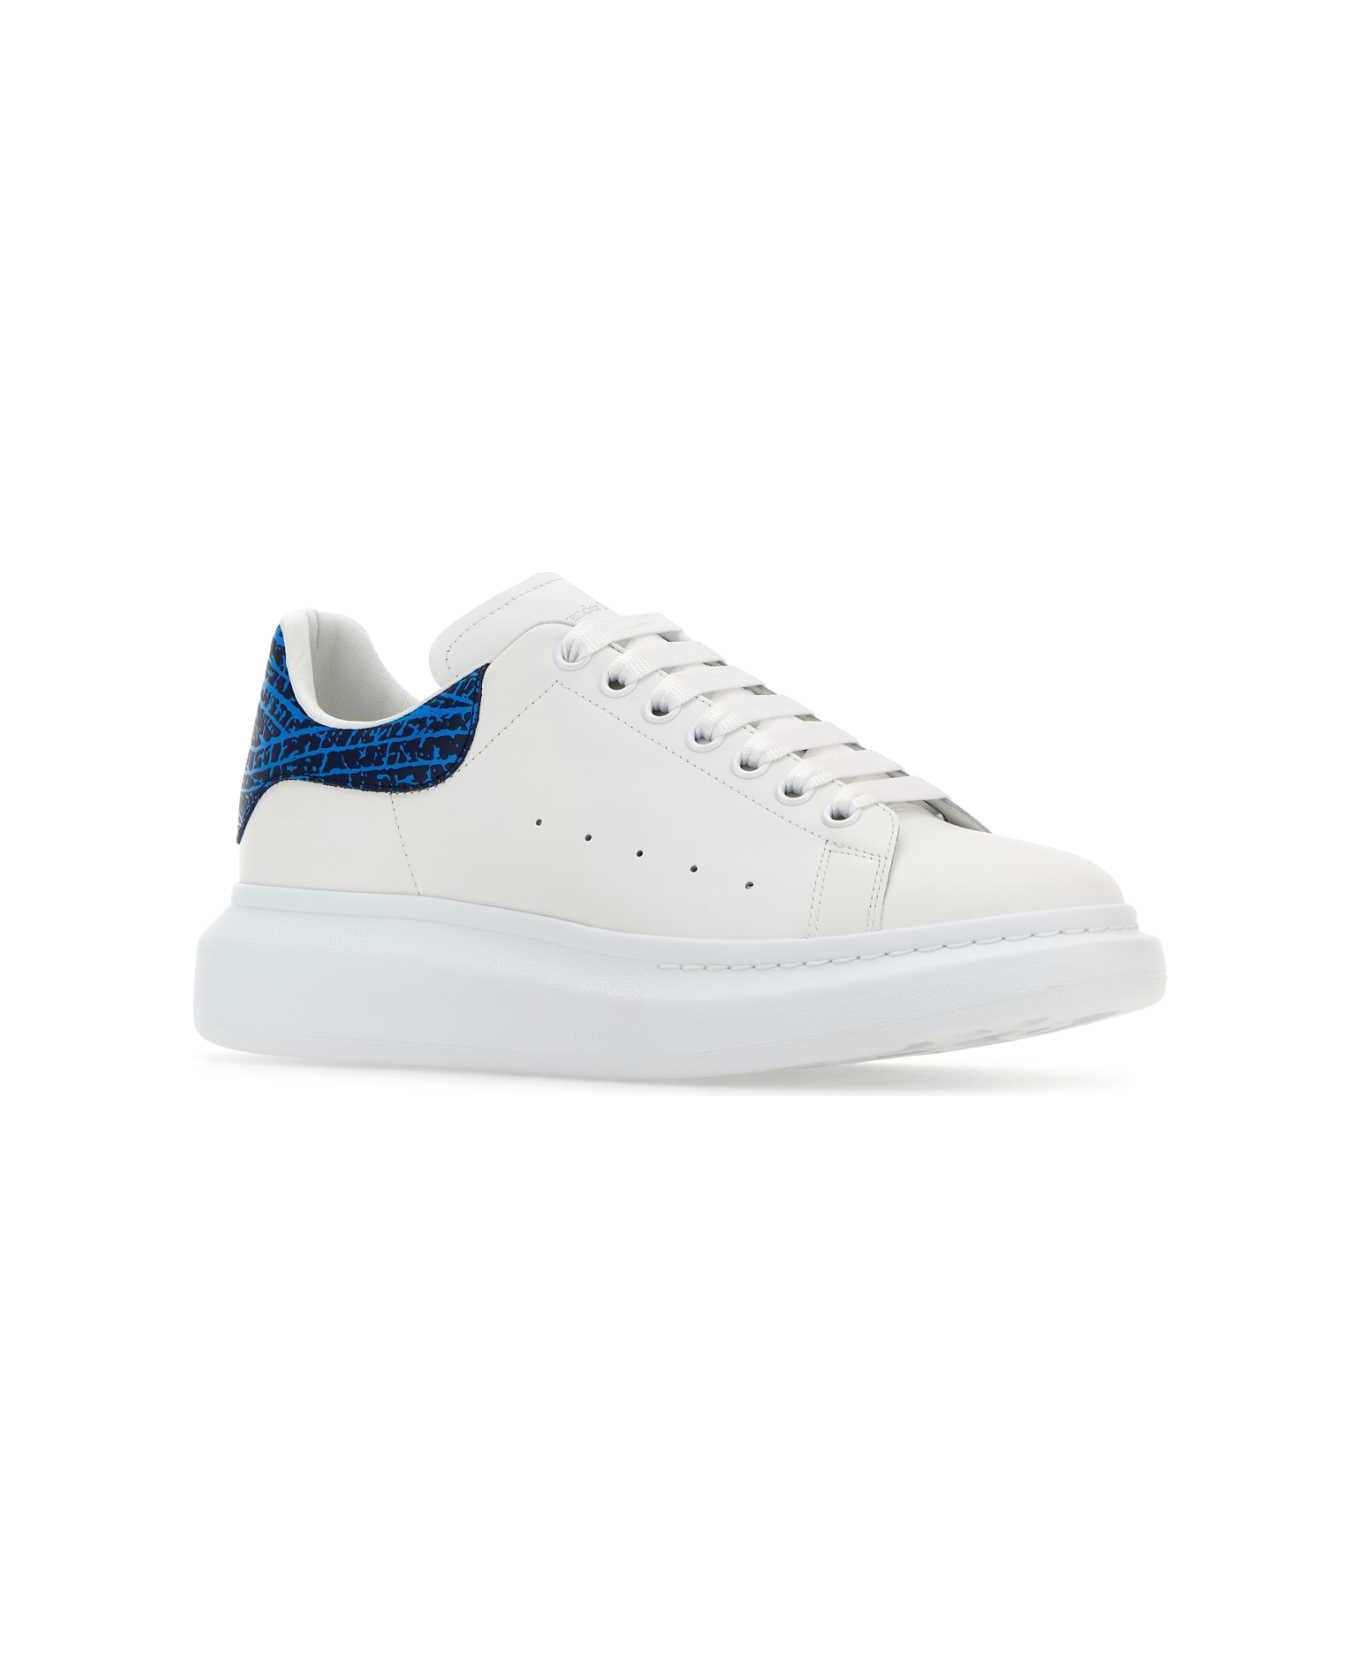 Alexander McQueen Sneakers With Printed Leather Heel - WHITELAPISBLUE スニーカー